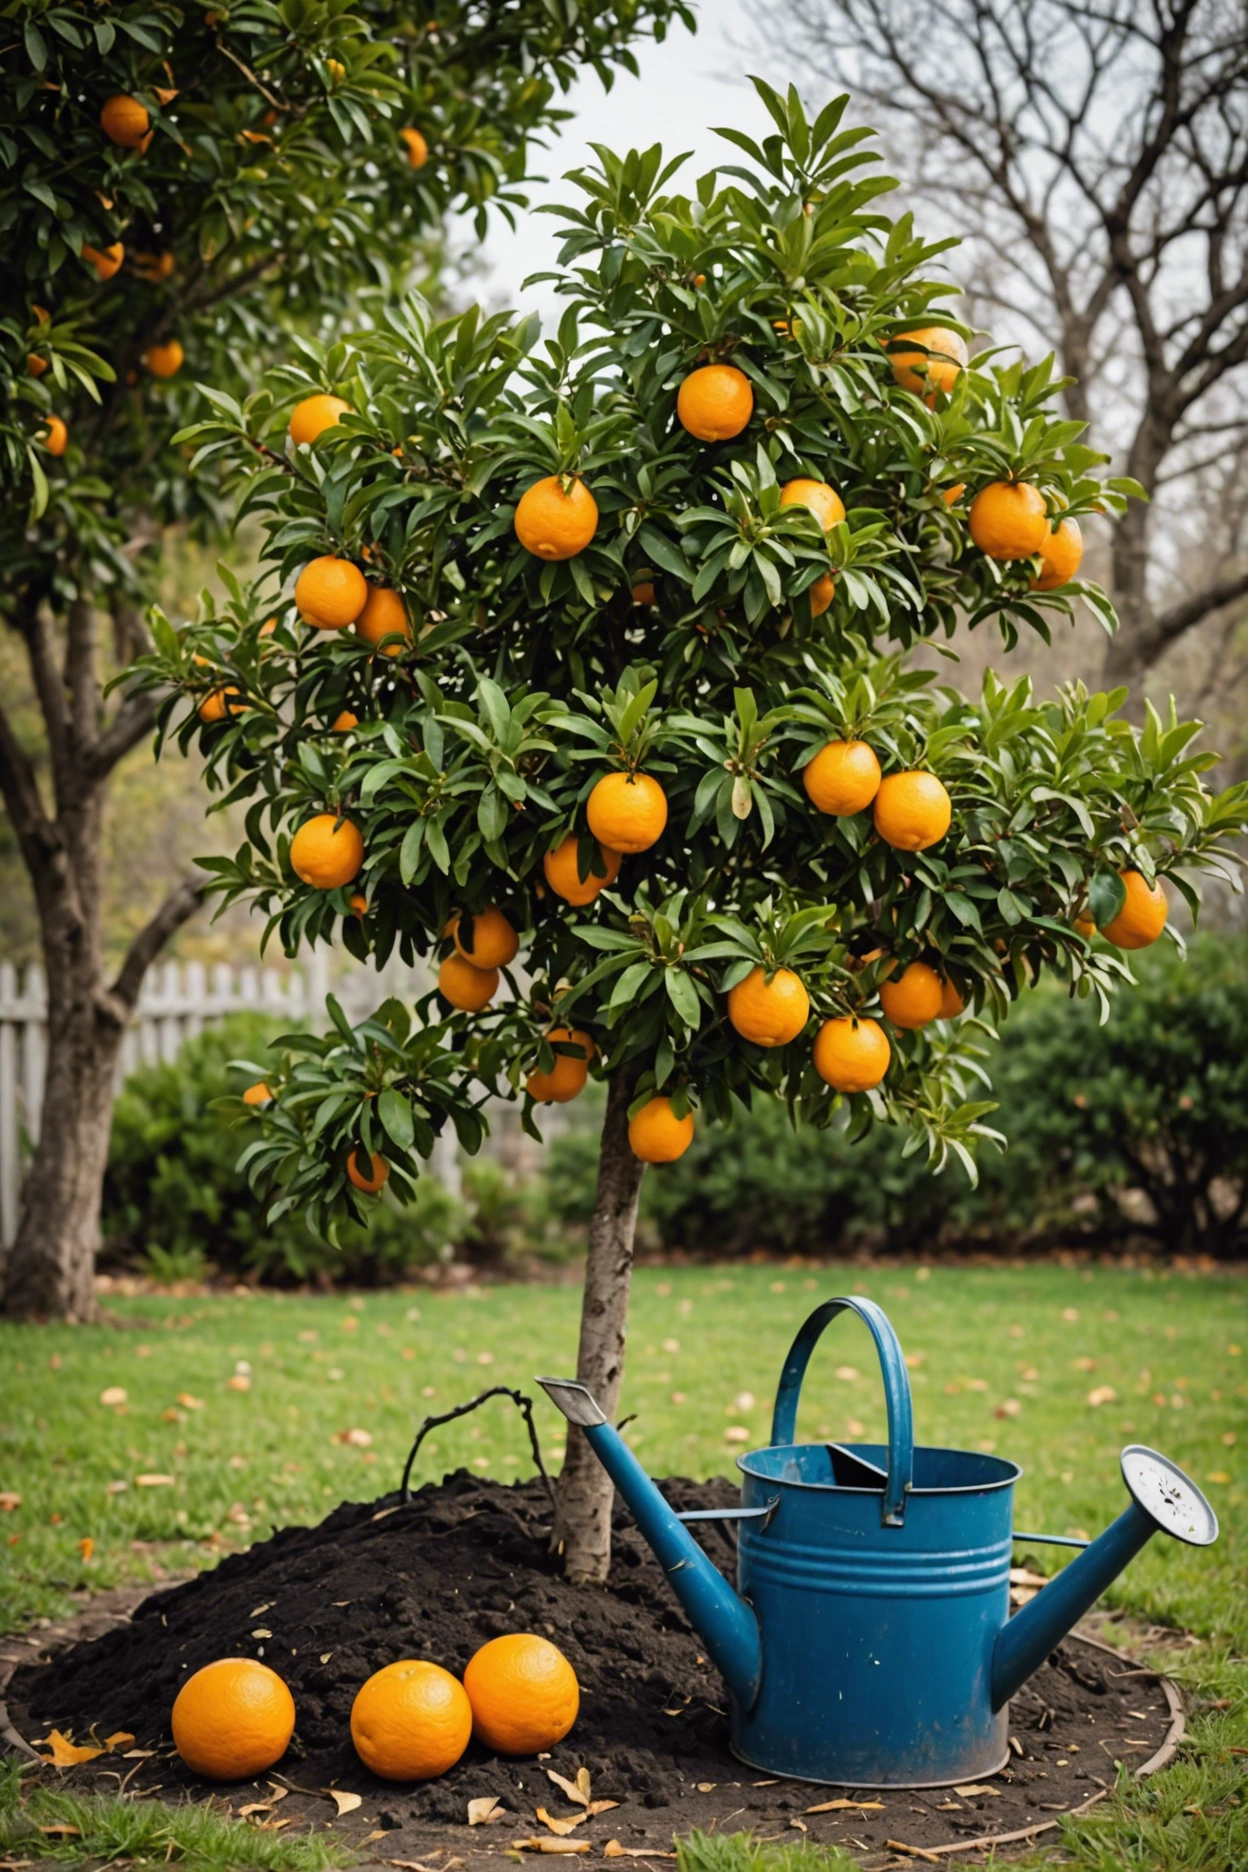 "Distressed orange tree with wilting leaves and no fruit, with a pH testing kit, watering can, and citrus fertilizer nearby."